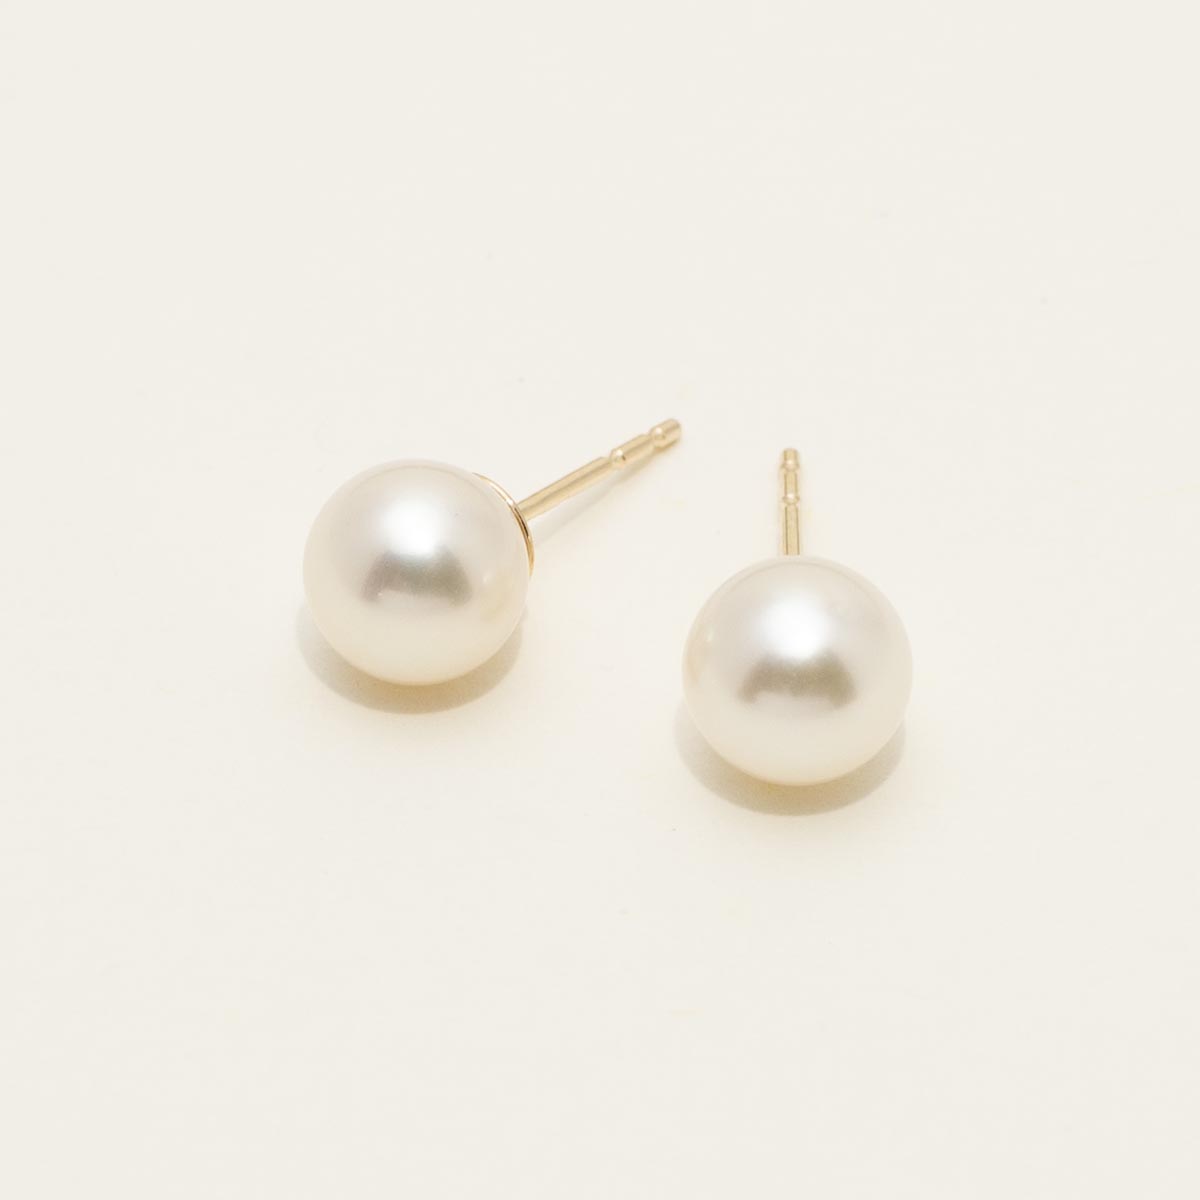 Mastoloni Cultured Freshwater Pearl Stud Earrings in 14kt Yellow Gold (6-6.5mm pearls)